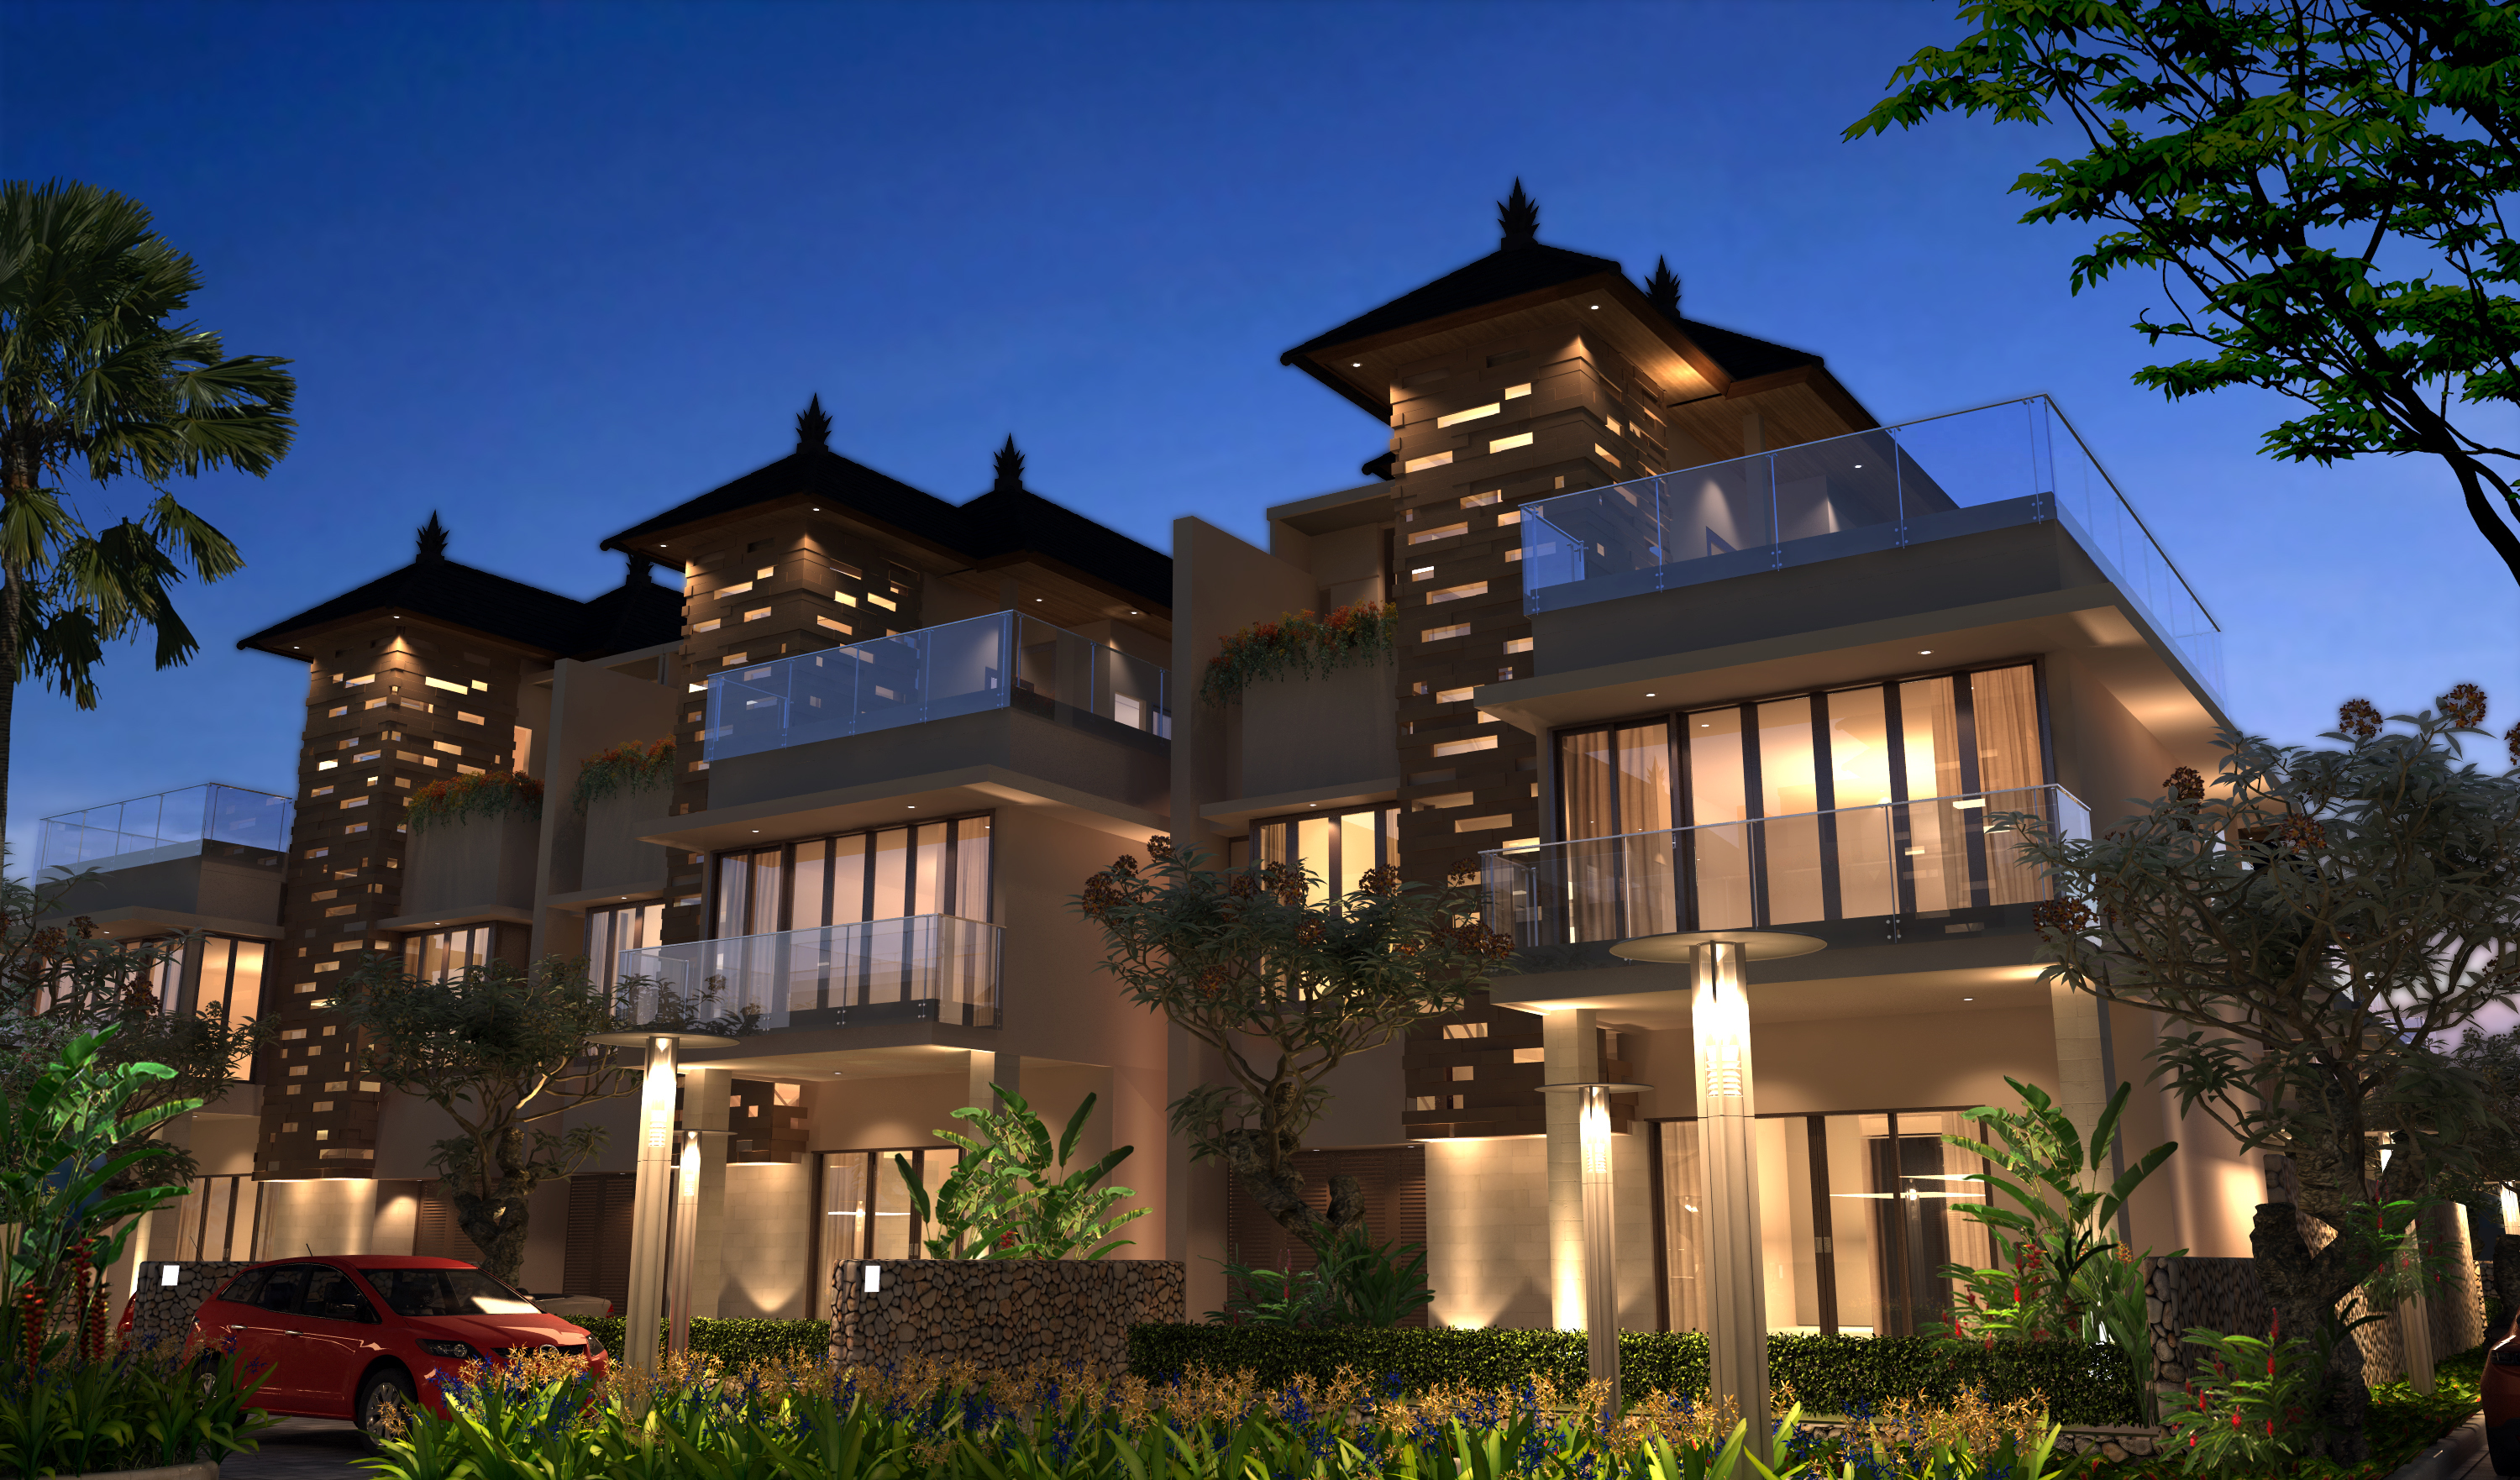 Residential House In Bali Wallpaper And Image